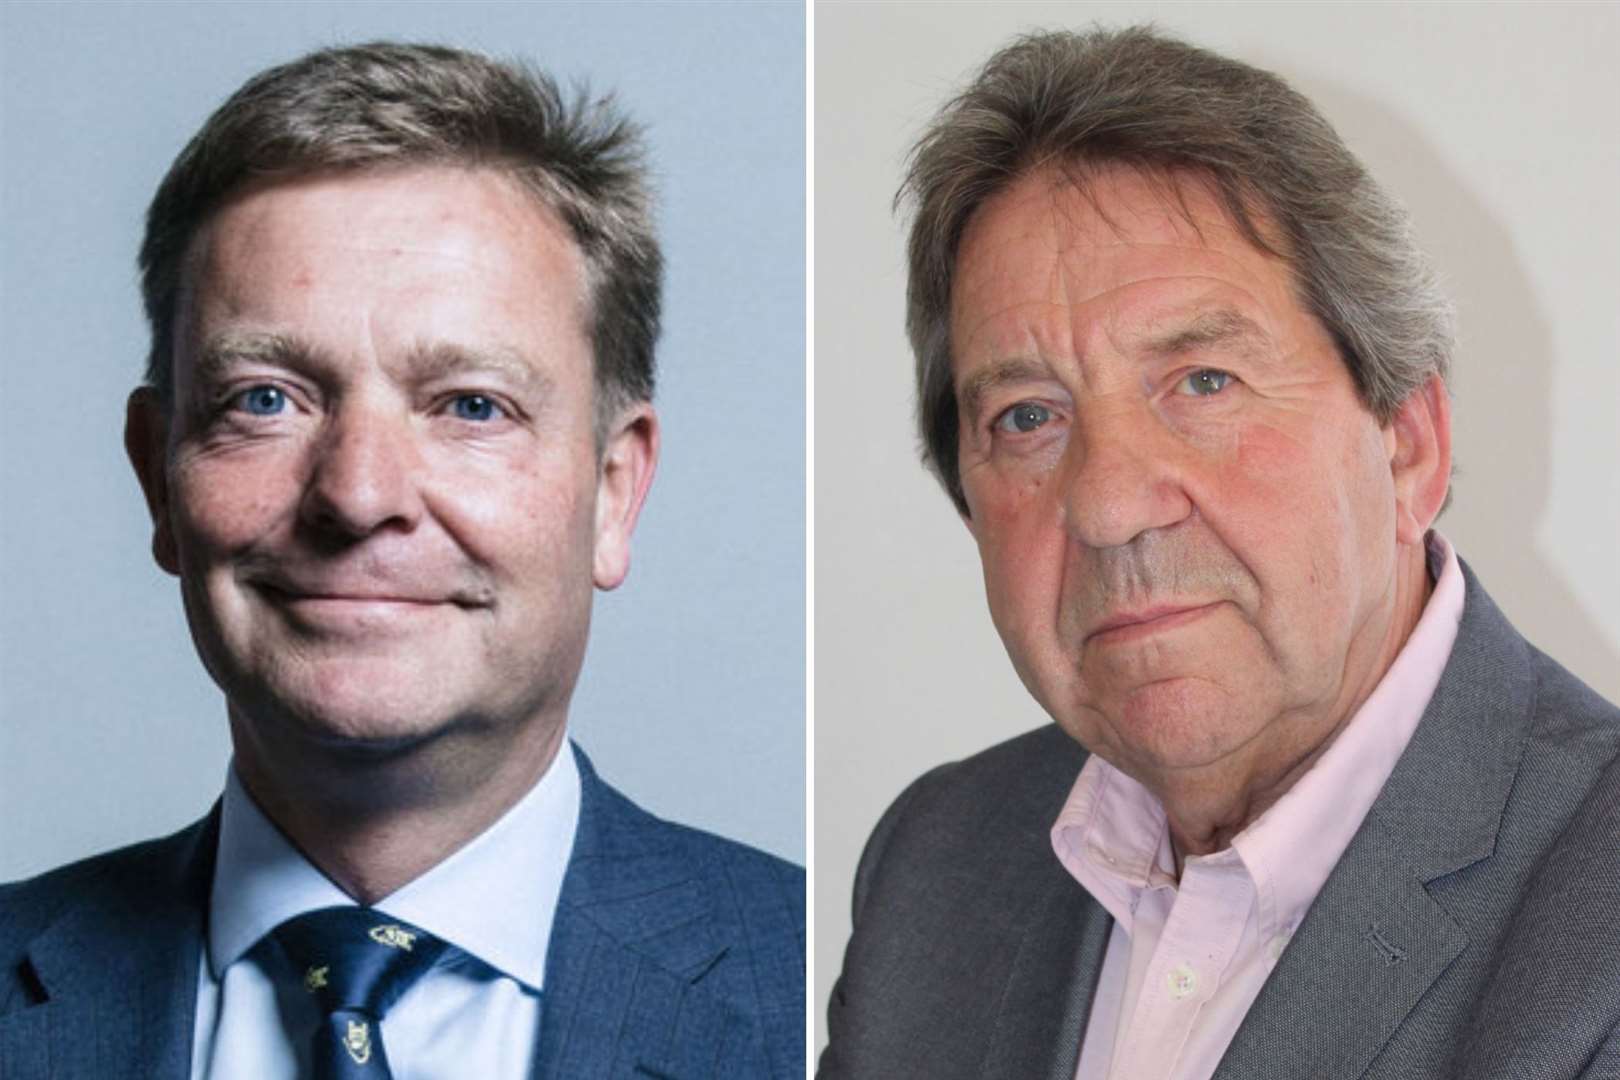 Craig Mackinlay and Gordon Henderson have both signed the letter to Grant Shapps